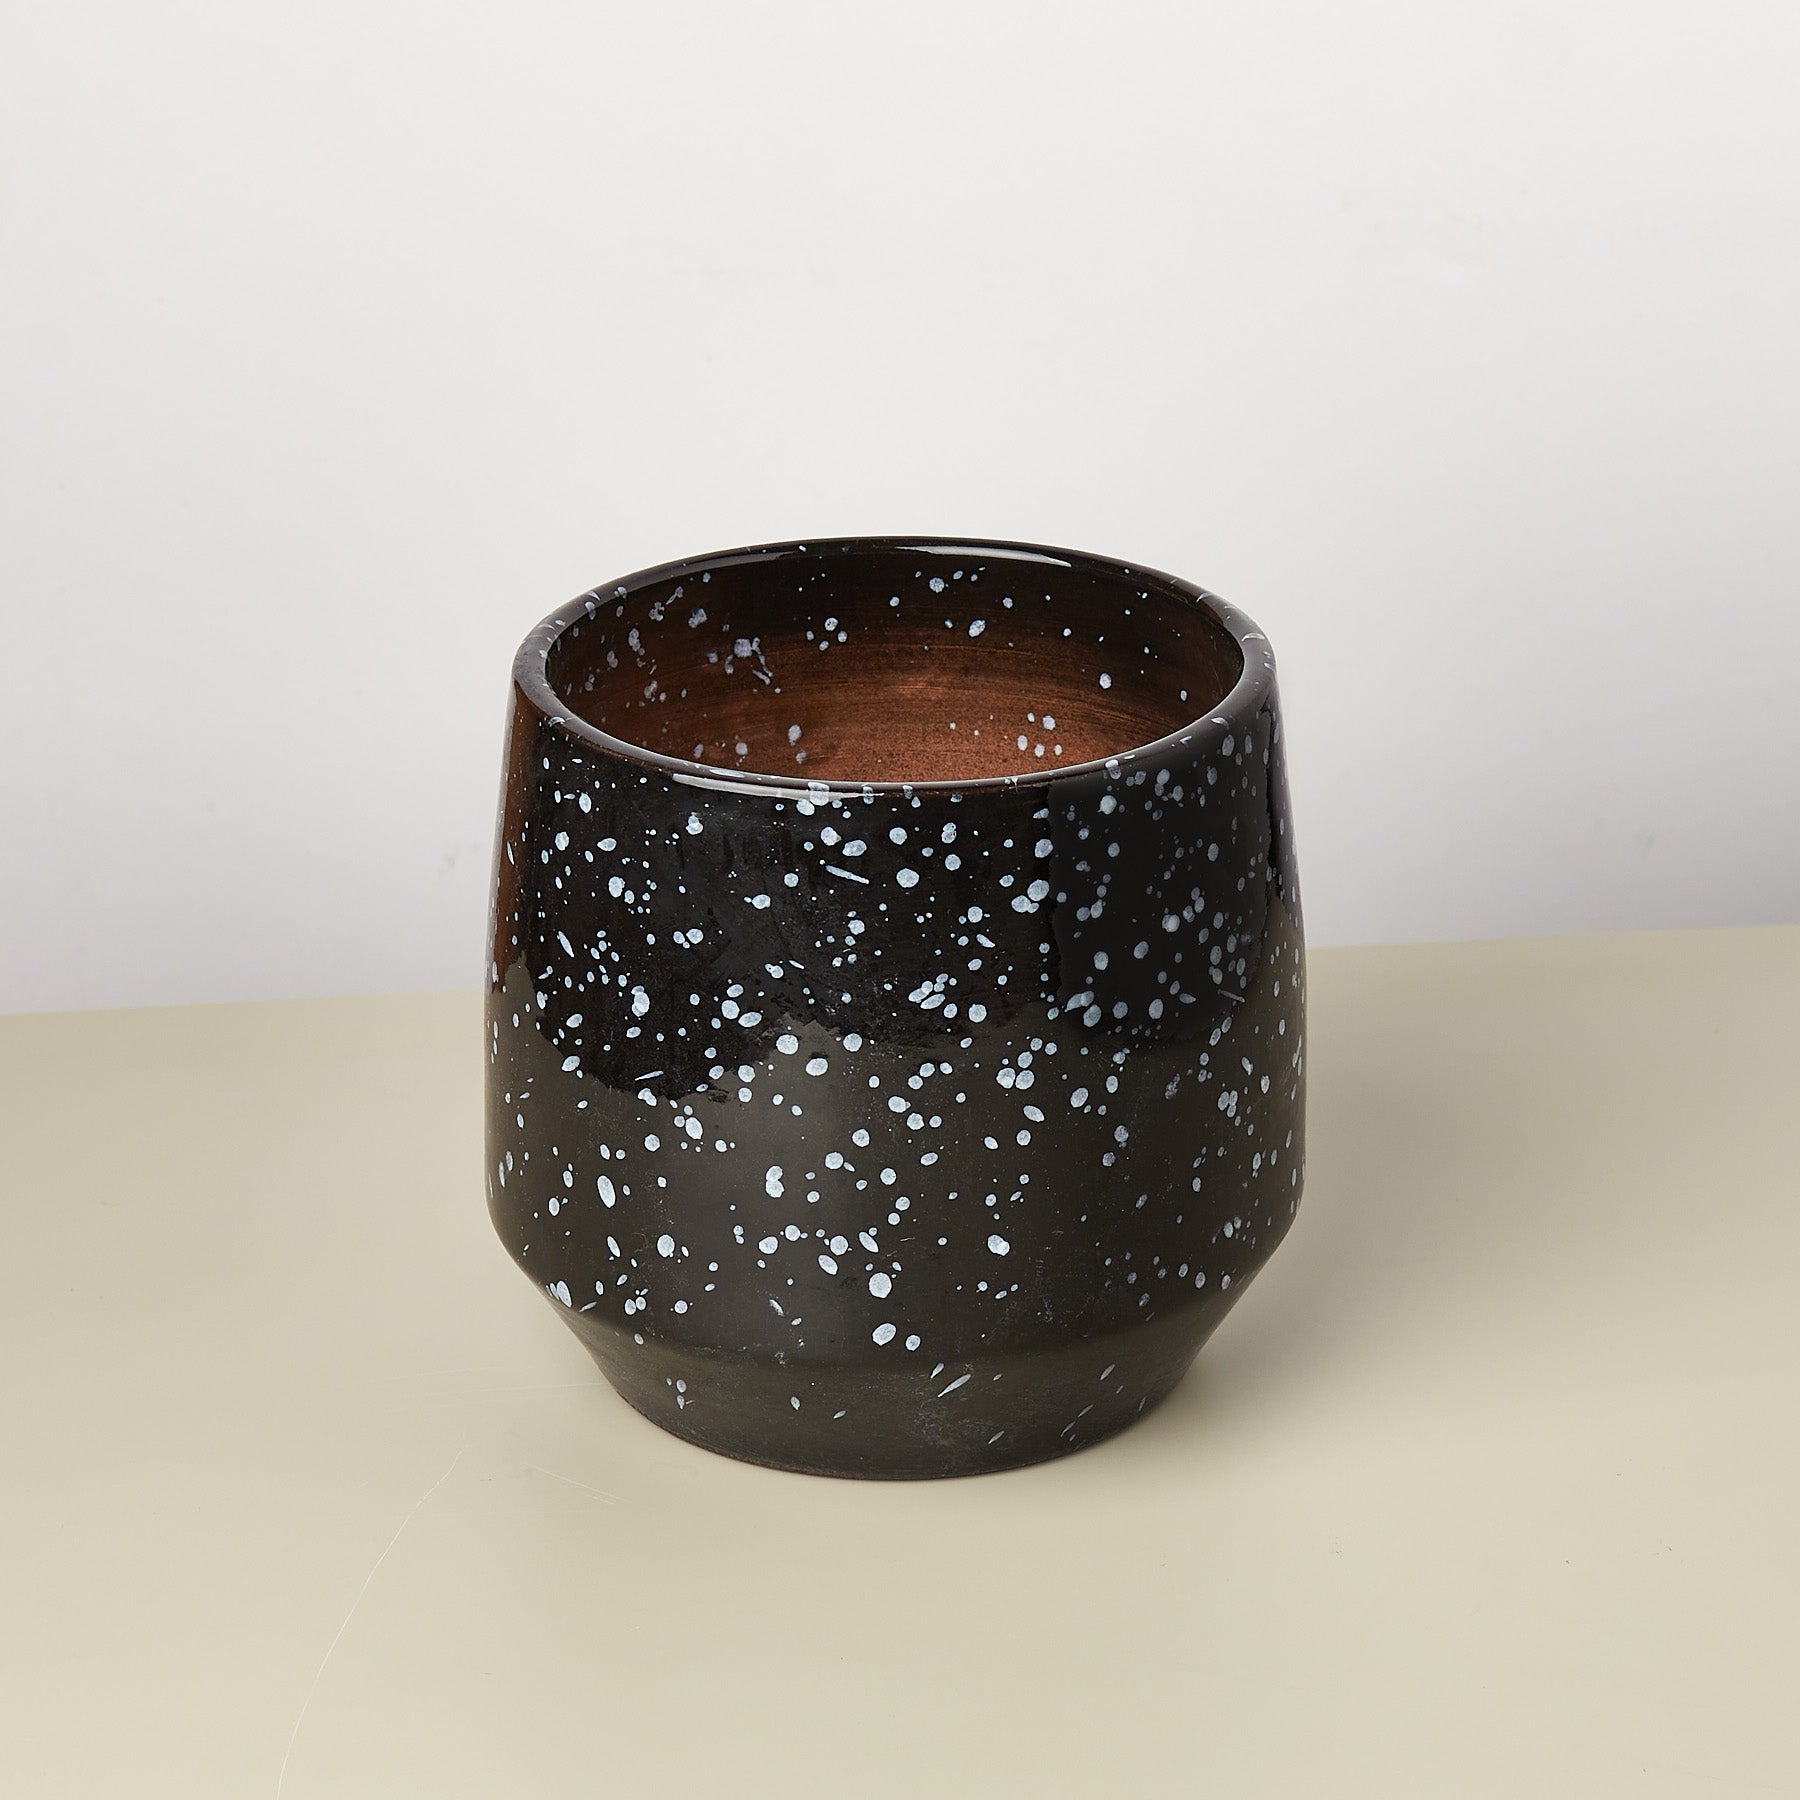 A black and white pot with speckles, perfect for your top garden center near me.